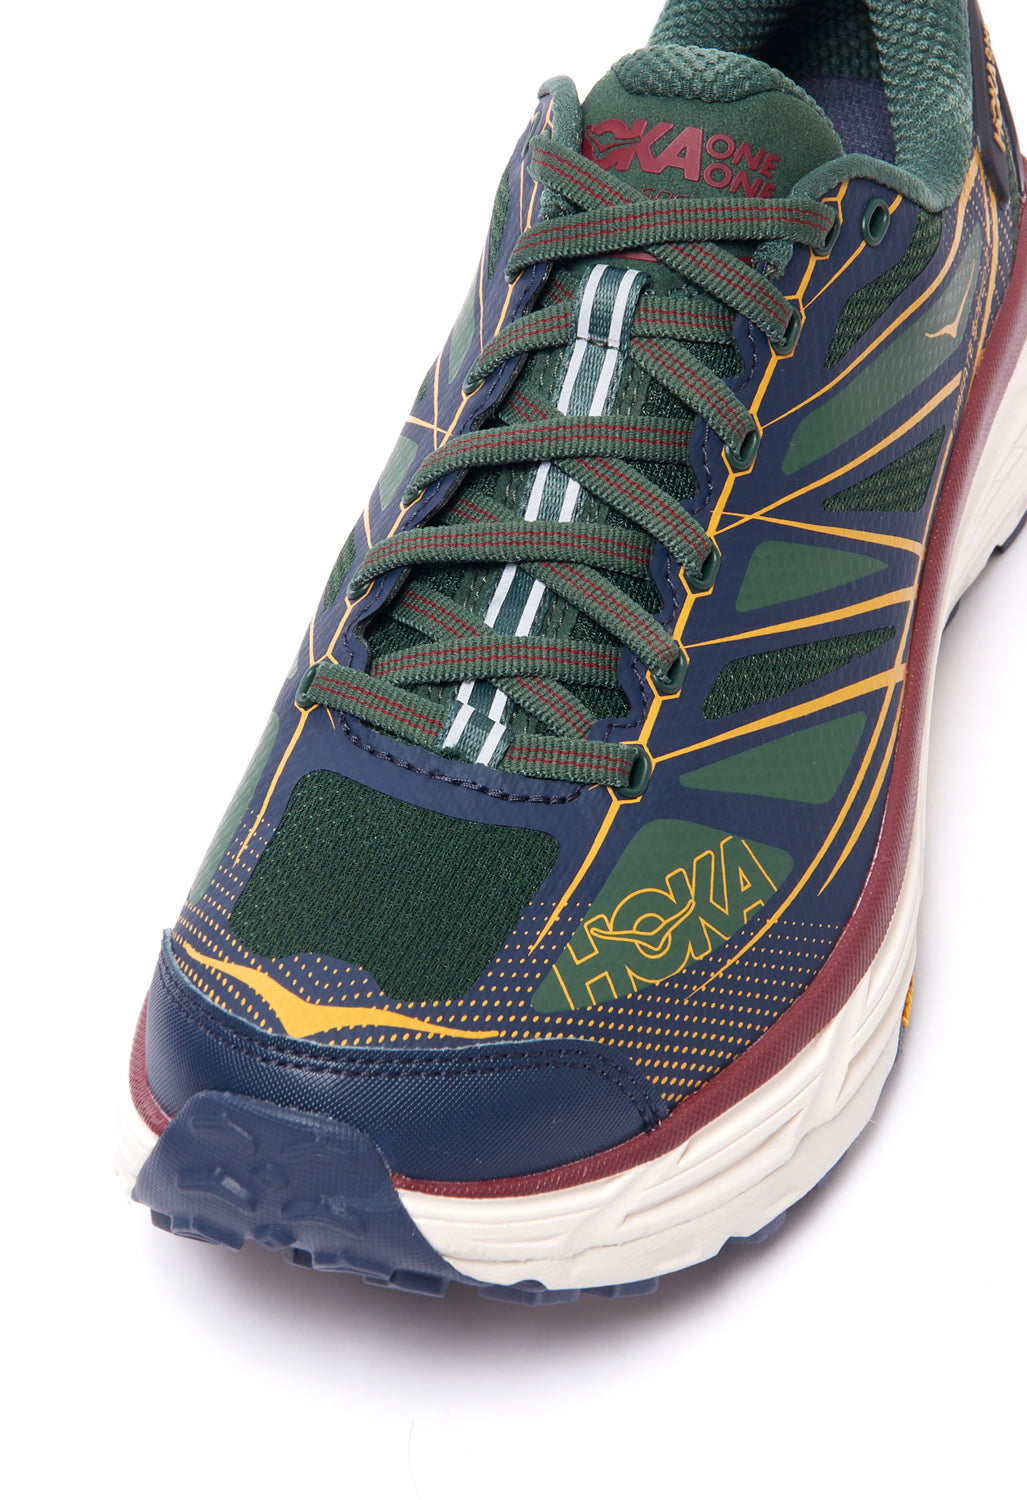 Hoka Unisex Mafate Speed 2 Trainers - Mountain View/Outer Space